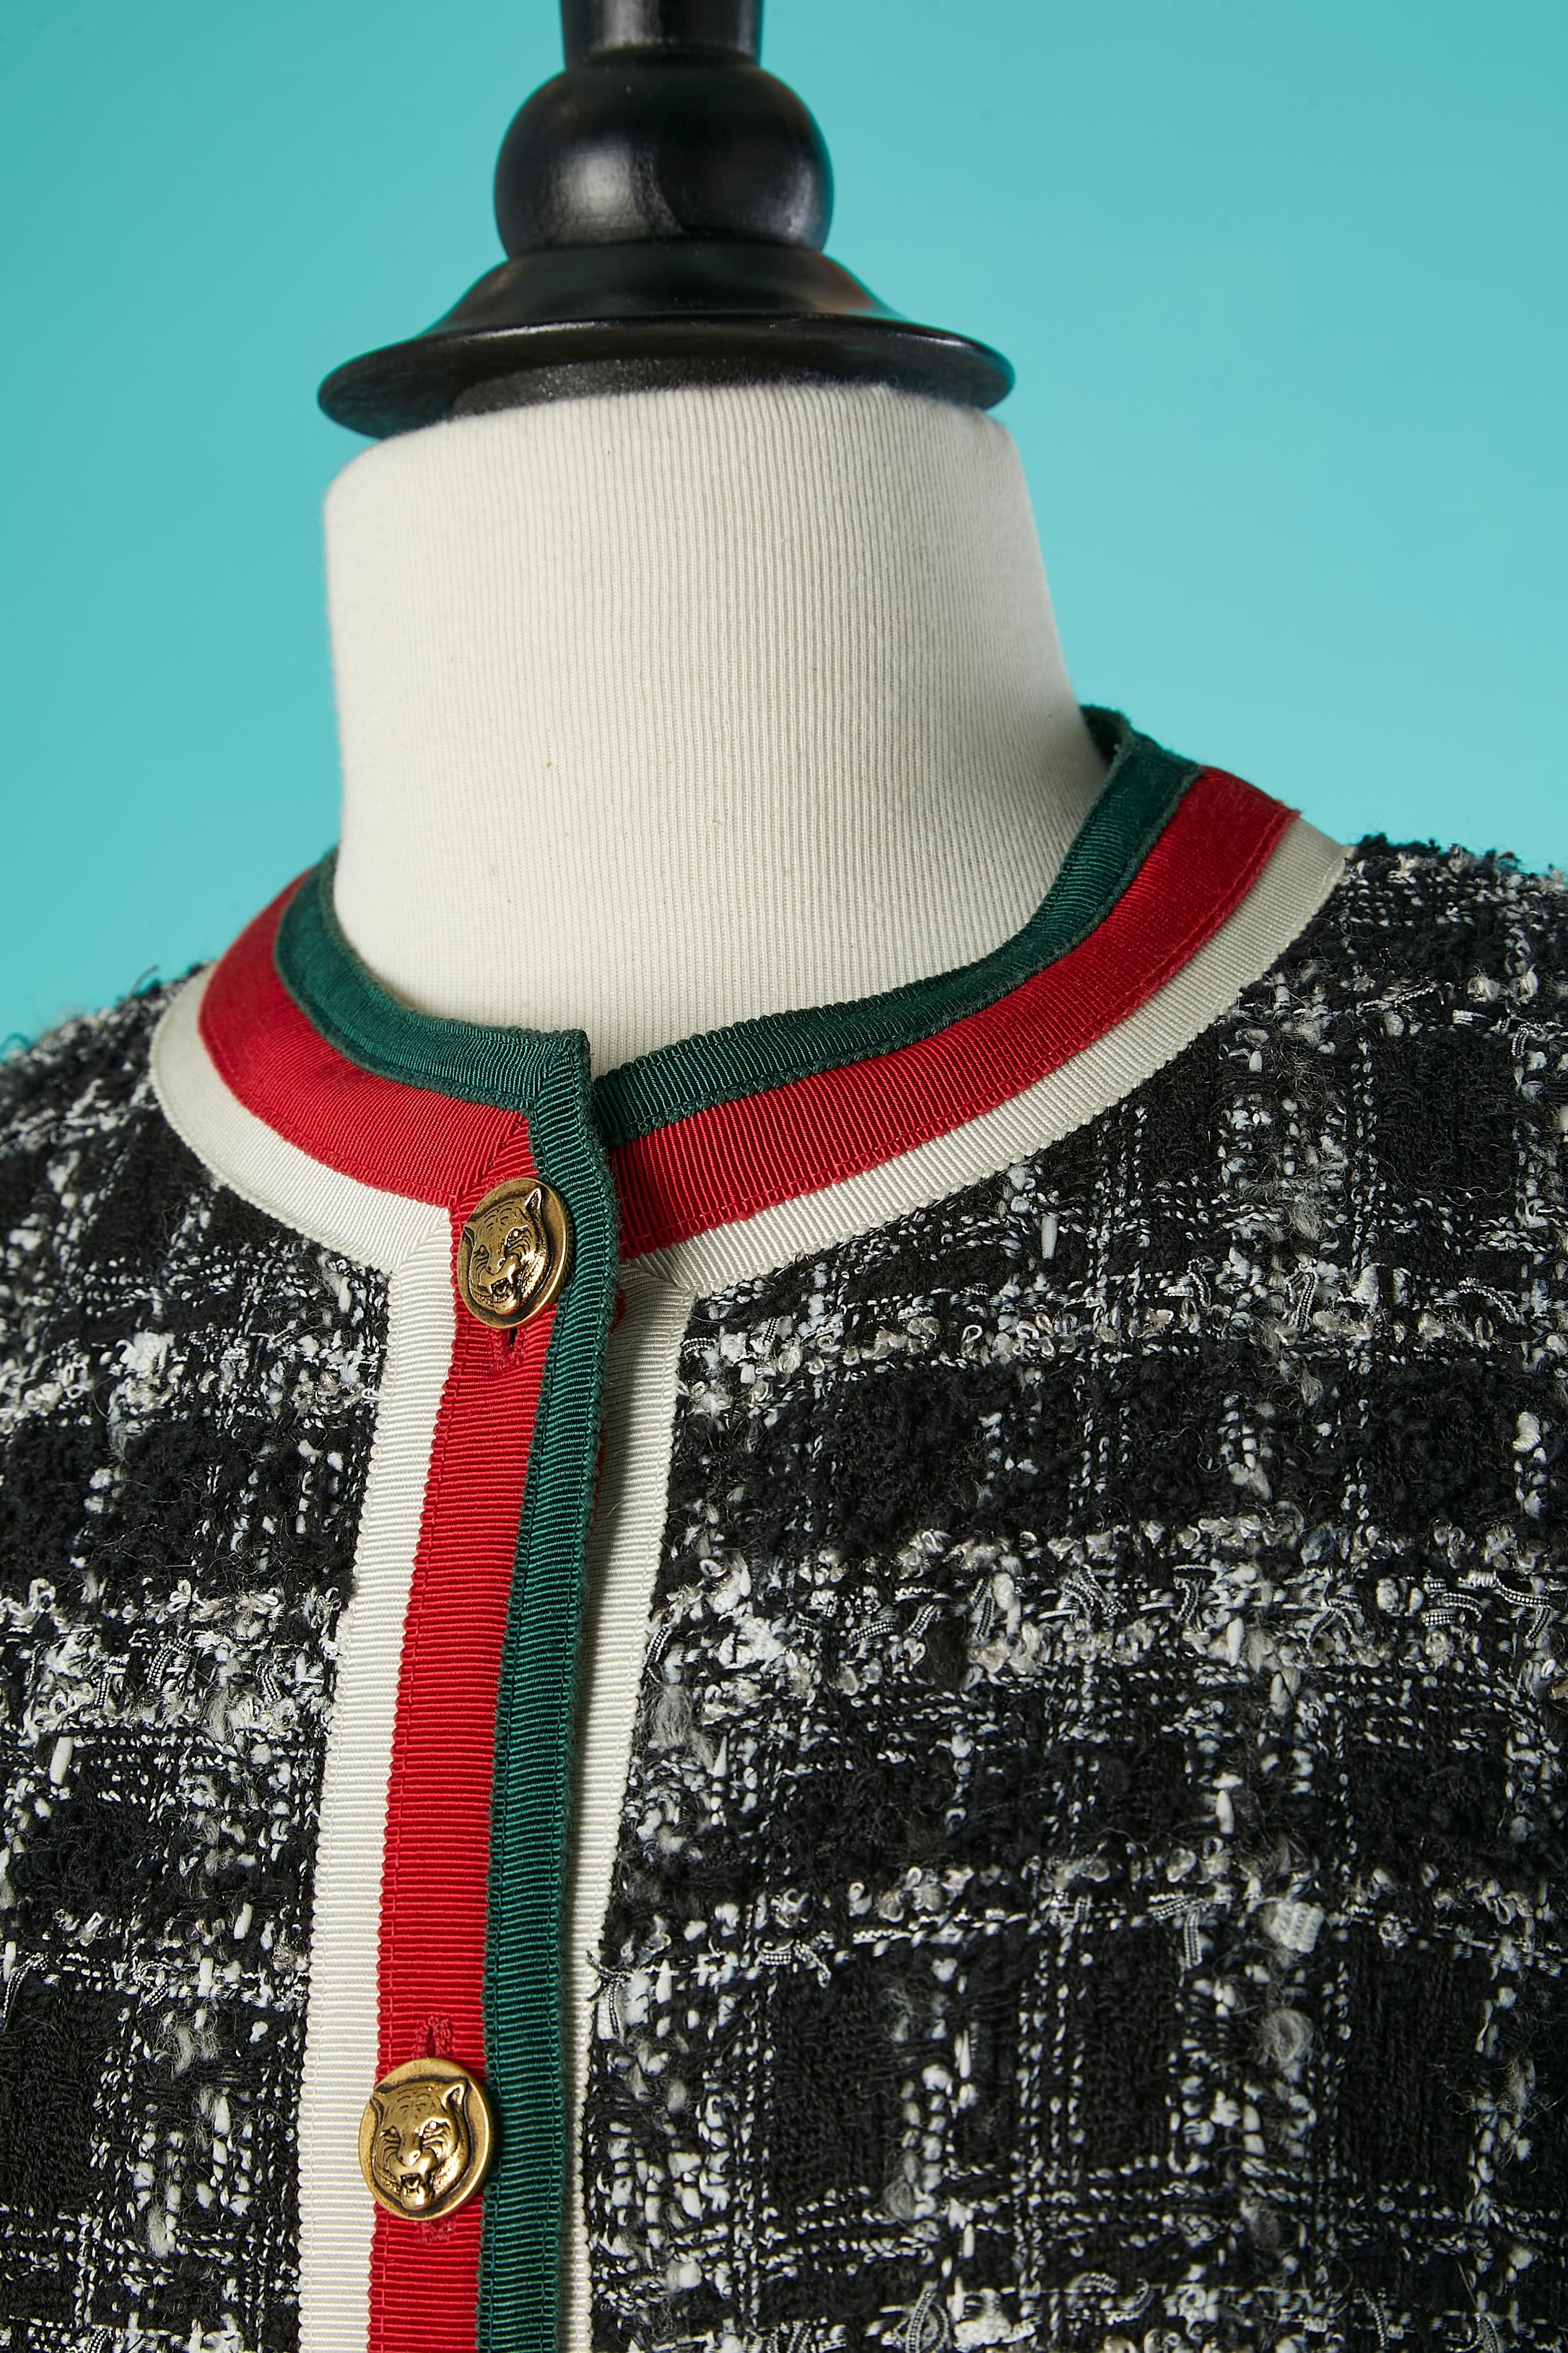 Black Tweed jacket with white, red & green trimming Gucci by Alessandro Michele 2019 For Sale